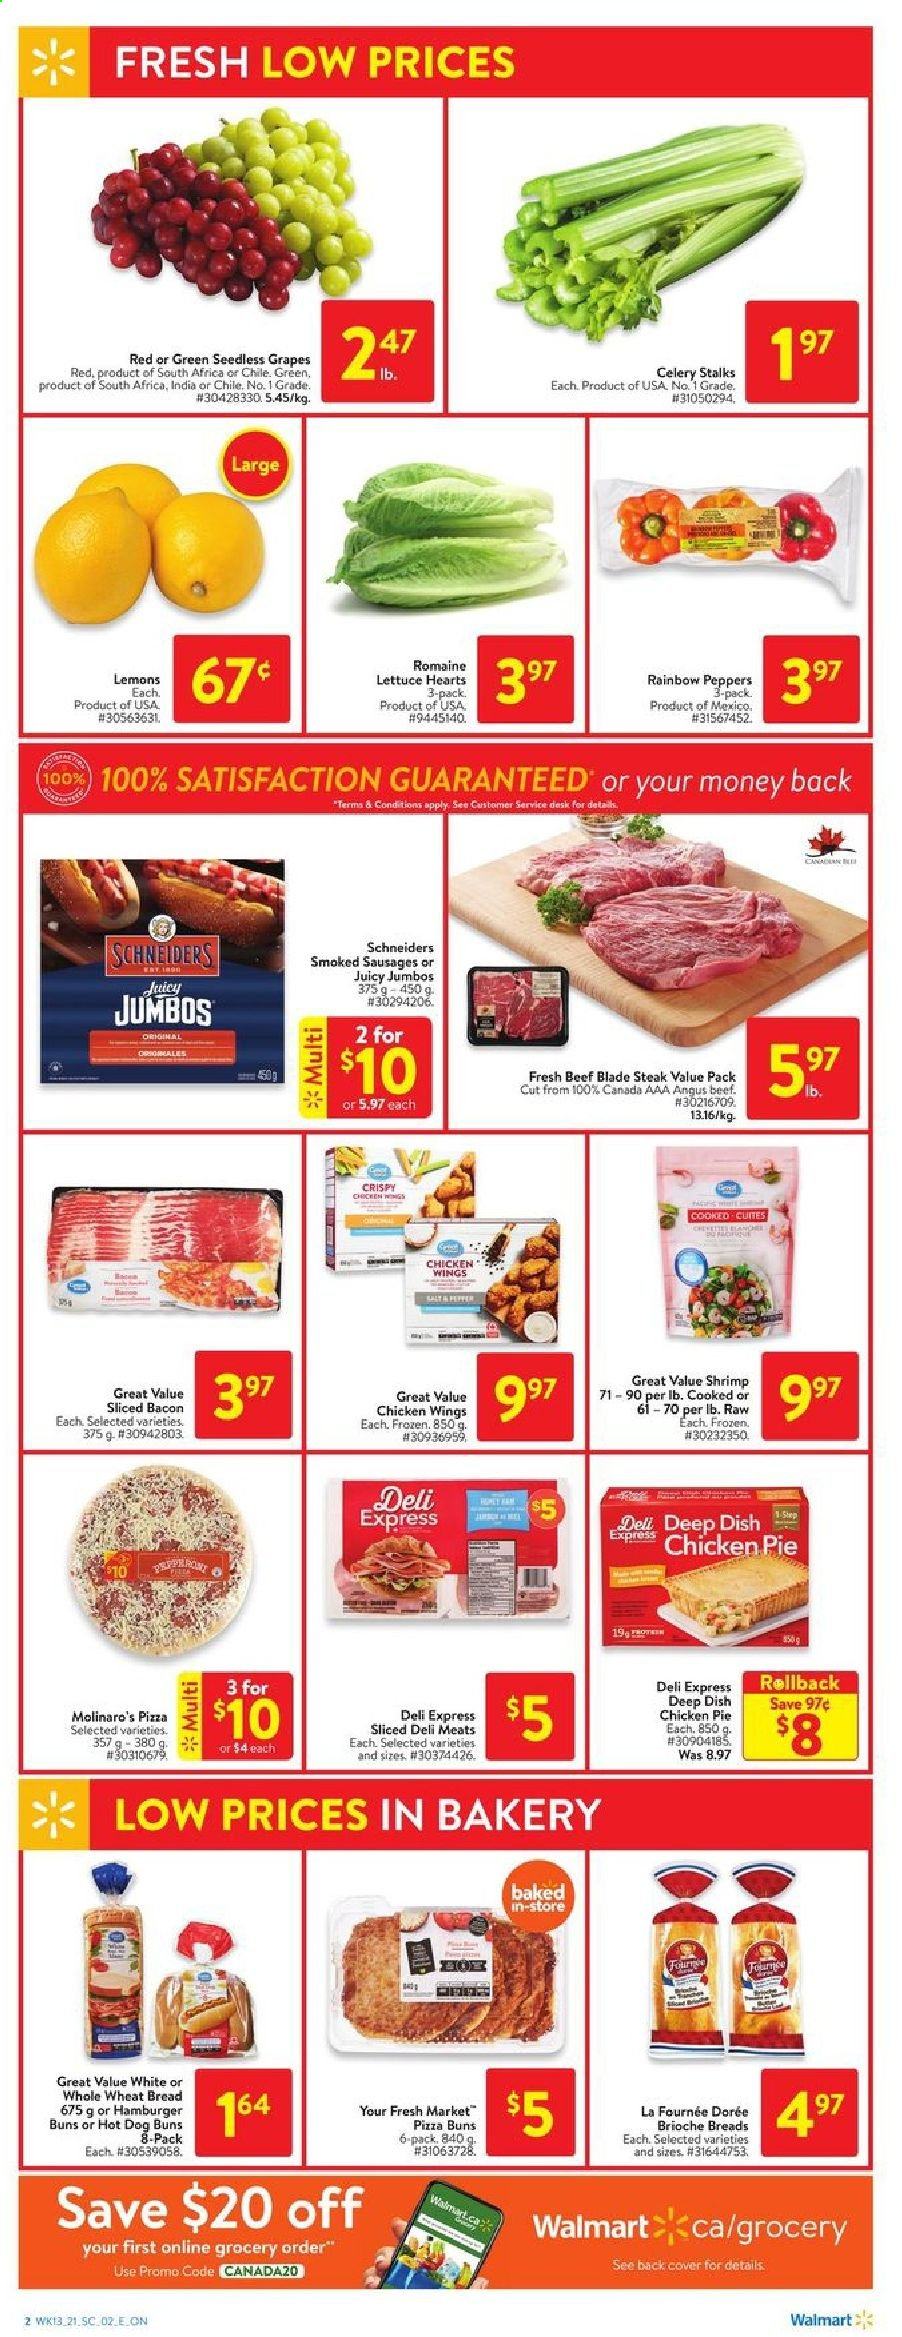 thumbnail - Walmart Flyer - April 22, 2021 - April 28, 2021 - Sales products - wheat bread, pie, buns, burger buns, brioche, celery, lettuce, peppers, sleeved celery, grapes, seedless grapes, lemons, shrimps, pizza, bacon, sausage, chicken wings, beef meat, steak. Page 2.